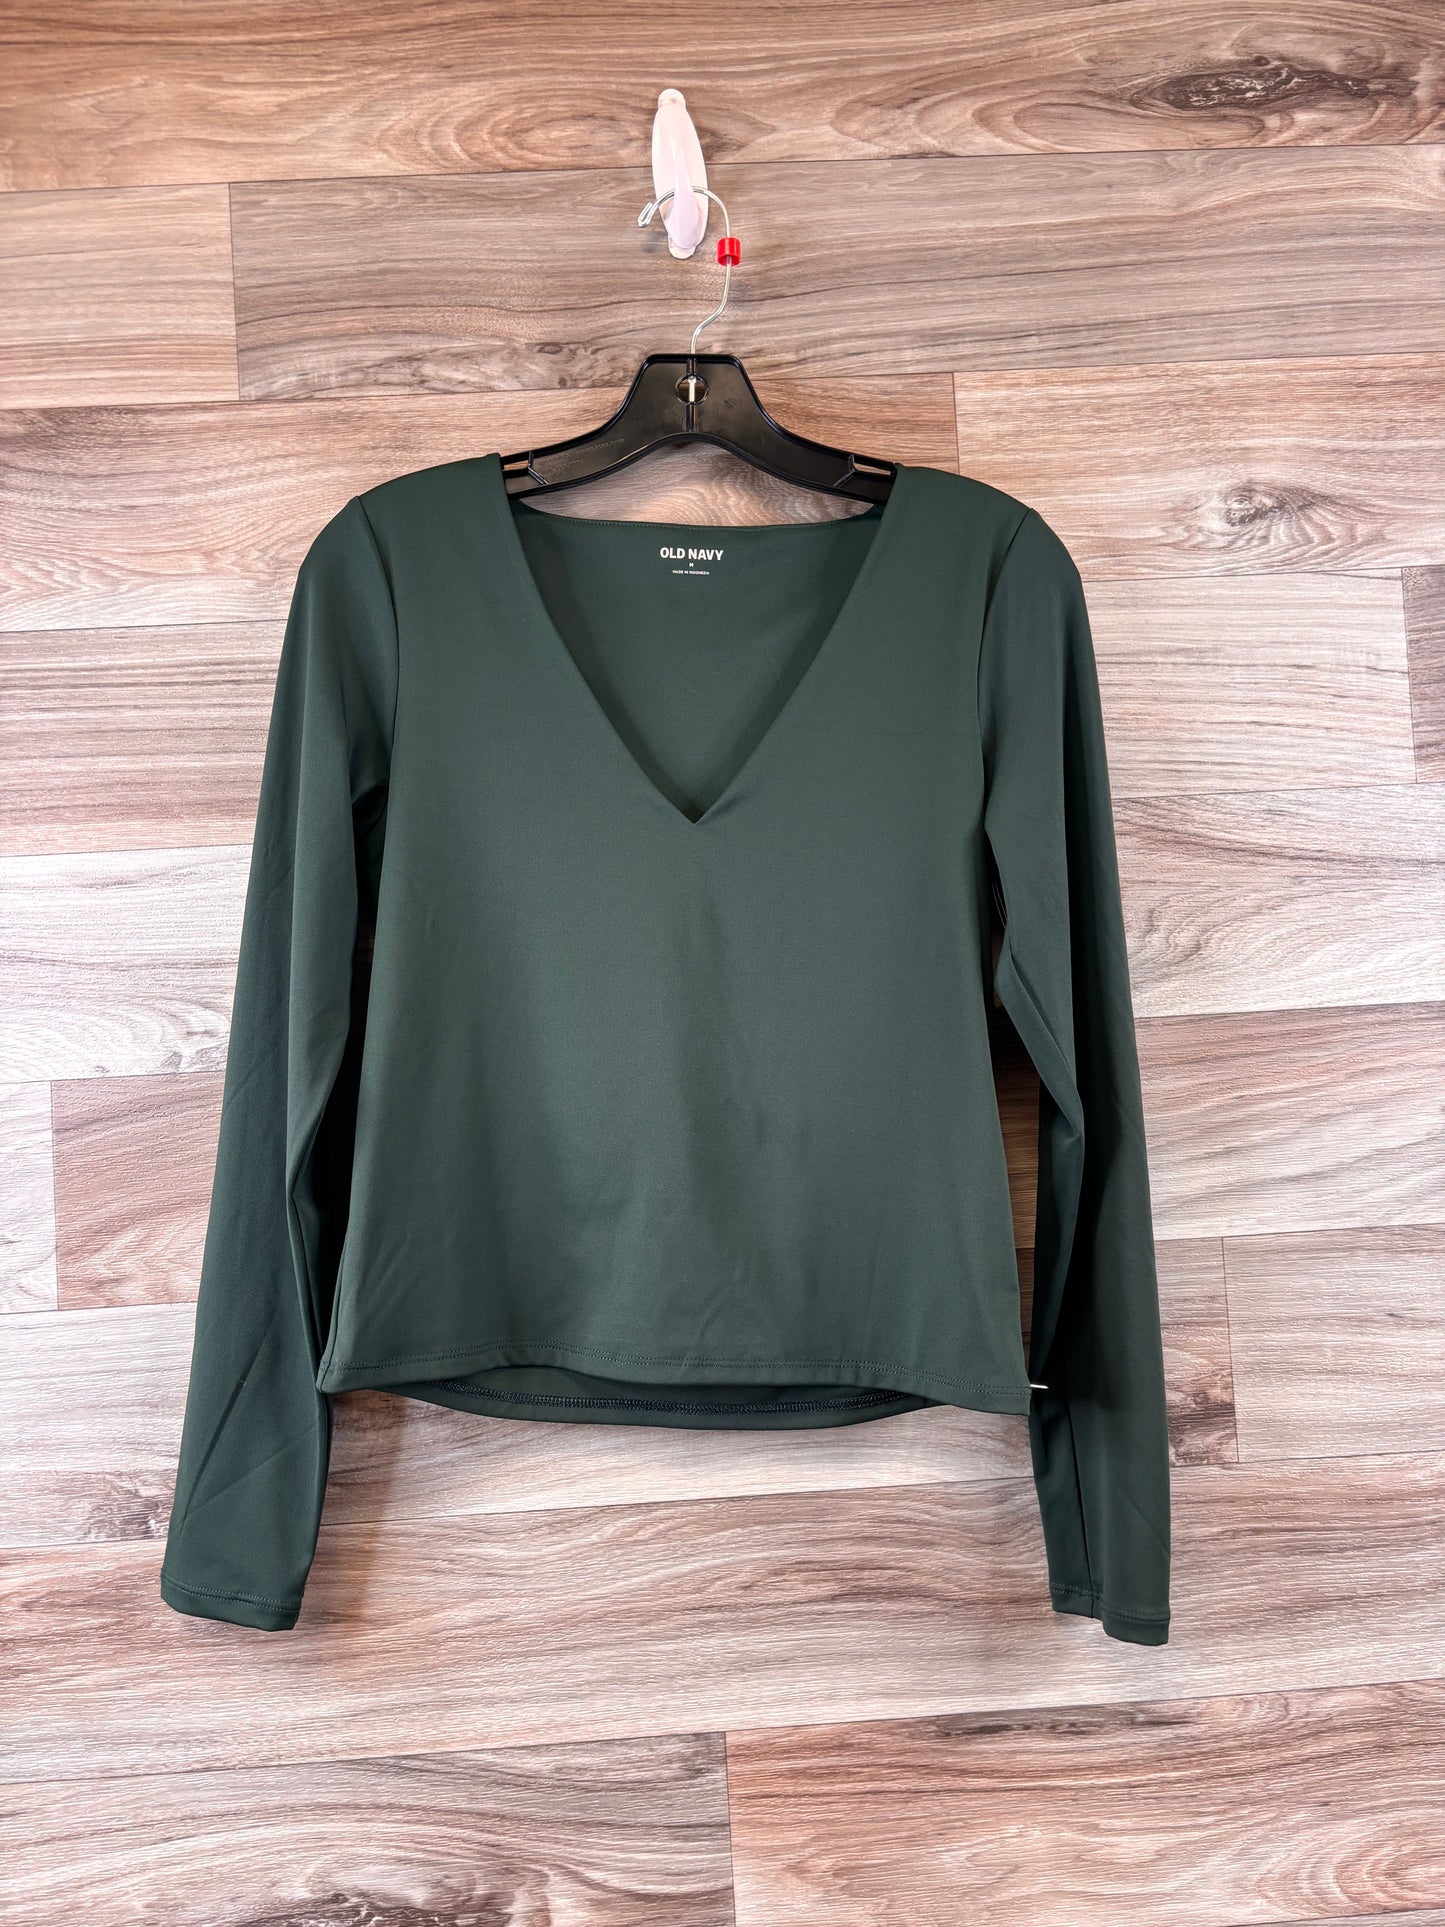 Green Top Long Sleeve Basic Old Navy, Size M